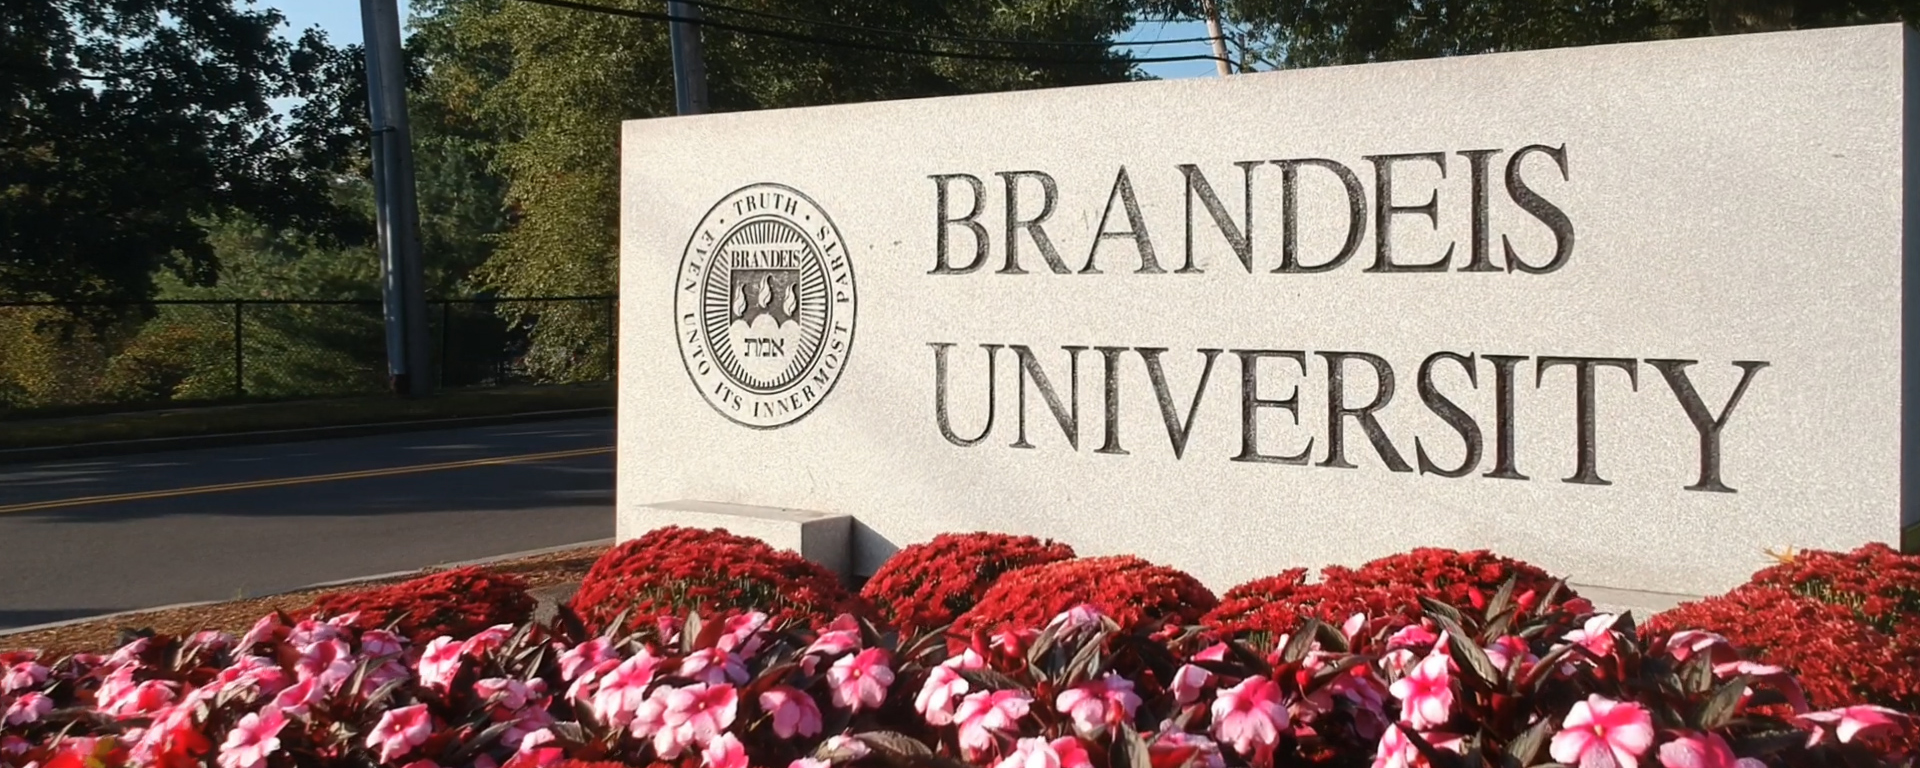 Brandeis entrance sign with pink flowers